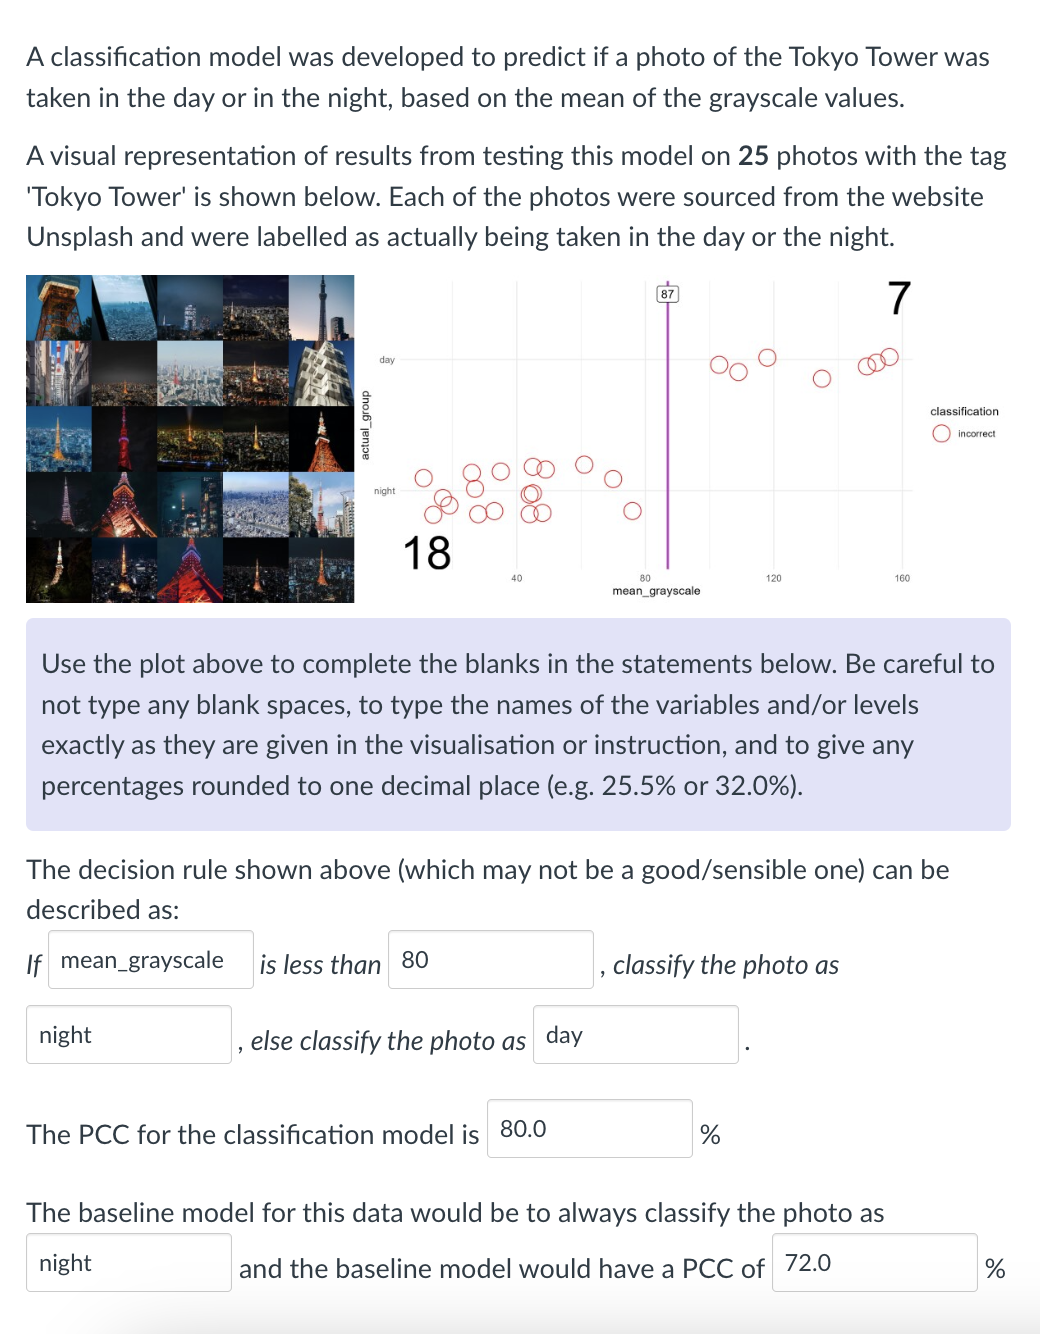 A classification model was developed to predict if a photo of the Tokyo Tower was
taken in the day or in the night, based on the mean of the grayscale values.
A visual representation of results from testing this model on 25 photos with the tag
'Tokyo Tower' is shown below. Each of the photos were sourced from the website
Unsplash and were labelled as actually being taken in the day or the night.
day
night
87
7
18
40
80
120
160
mean_grayscale
classification
incorrect
Use the plot above to complete the blanks in the statements below. Be careful to
not type any blank spaces, to type the names of the variables and/or levels
exactly as they are given in the visualisation or instruction, and to give any
percentages rounded to one decimal place (e.g. 25.5% or 32.0%).
The decision rule shown above (which may not be a good/sensible one) can be
described as:
If mean_grayscale is less than 80
"
classify the photo as
night
else classify the photo as
day
The PCC for the classification model is 80.0
%
The baseline model for this data would be to always classify the photo as
night
and the baseline model would have a PCC of 72.0
%